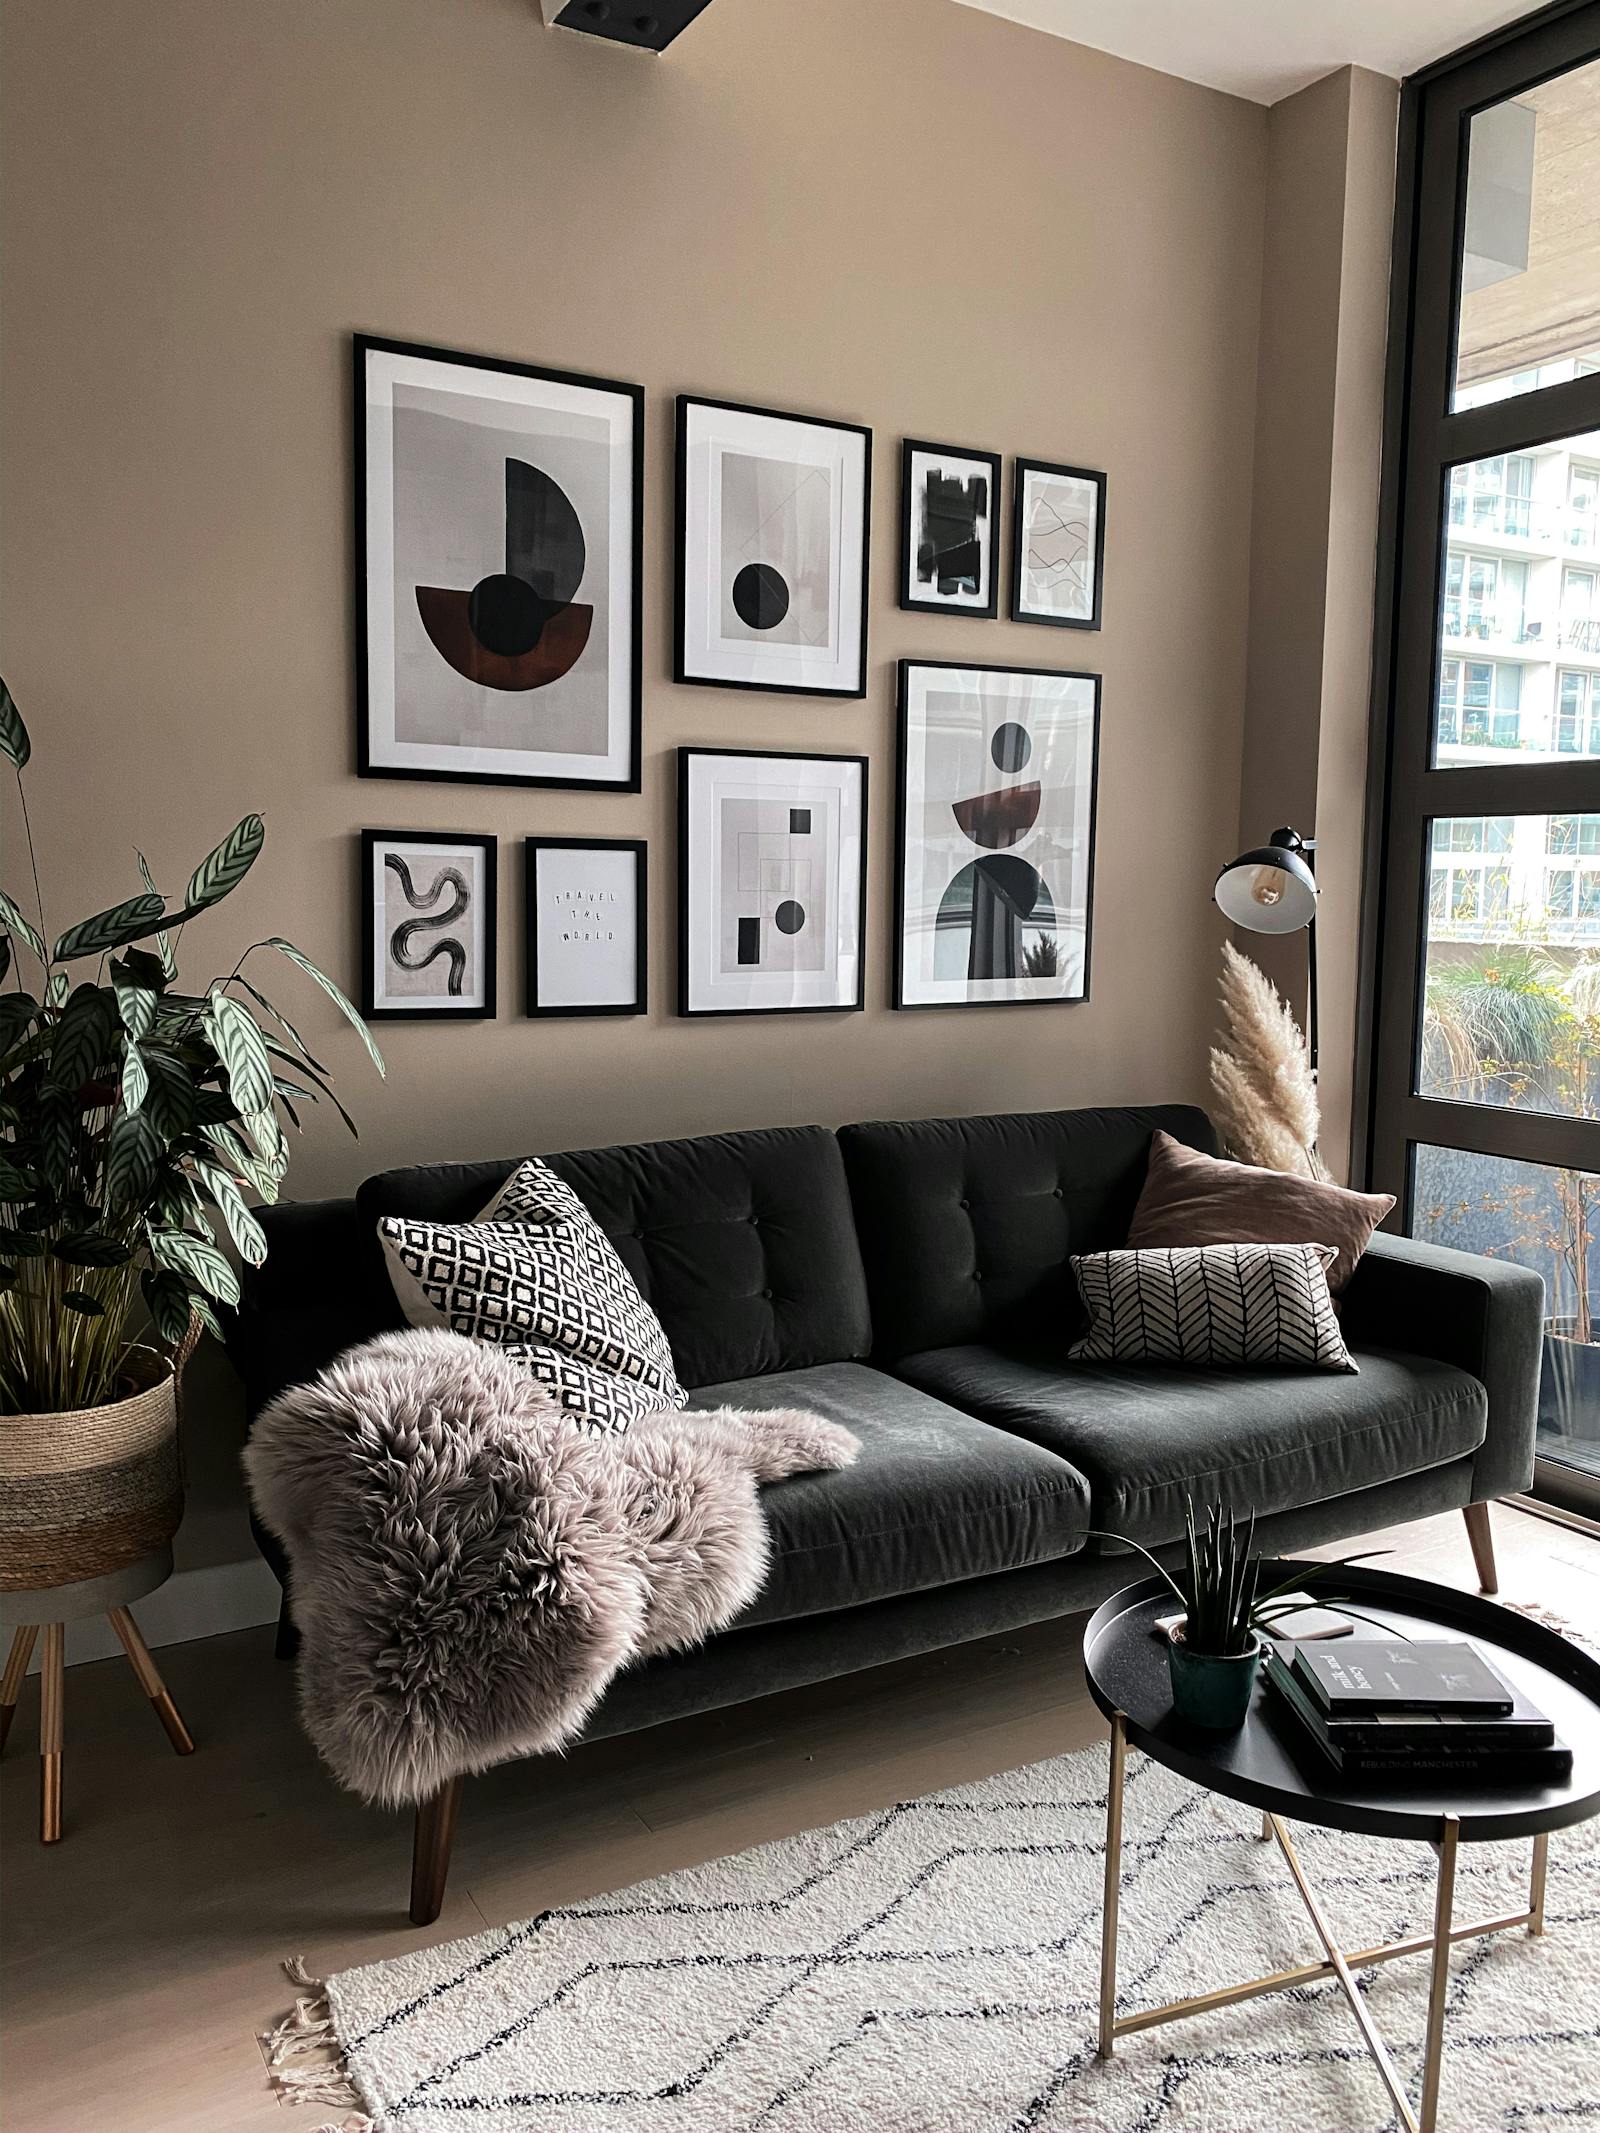 Real Homes Of Instagram: Lisa From @loft208 | Lick